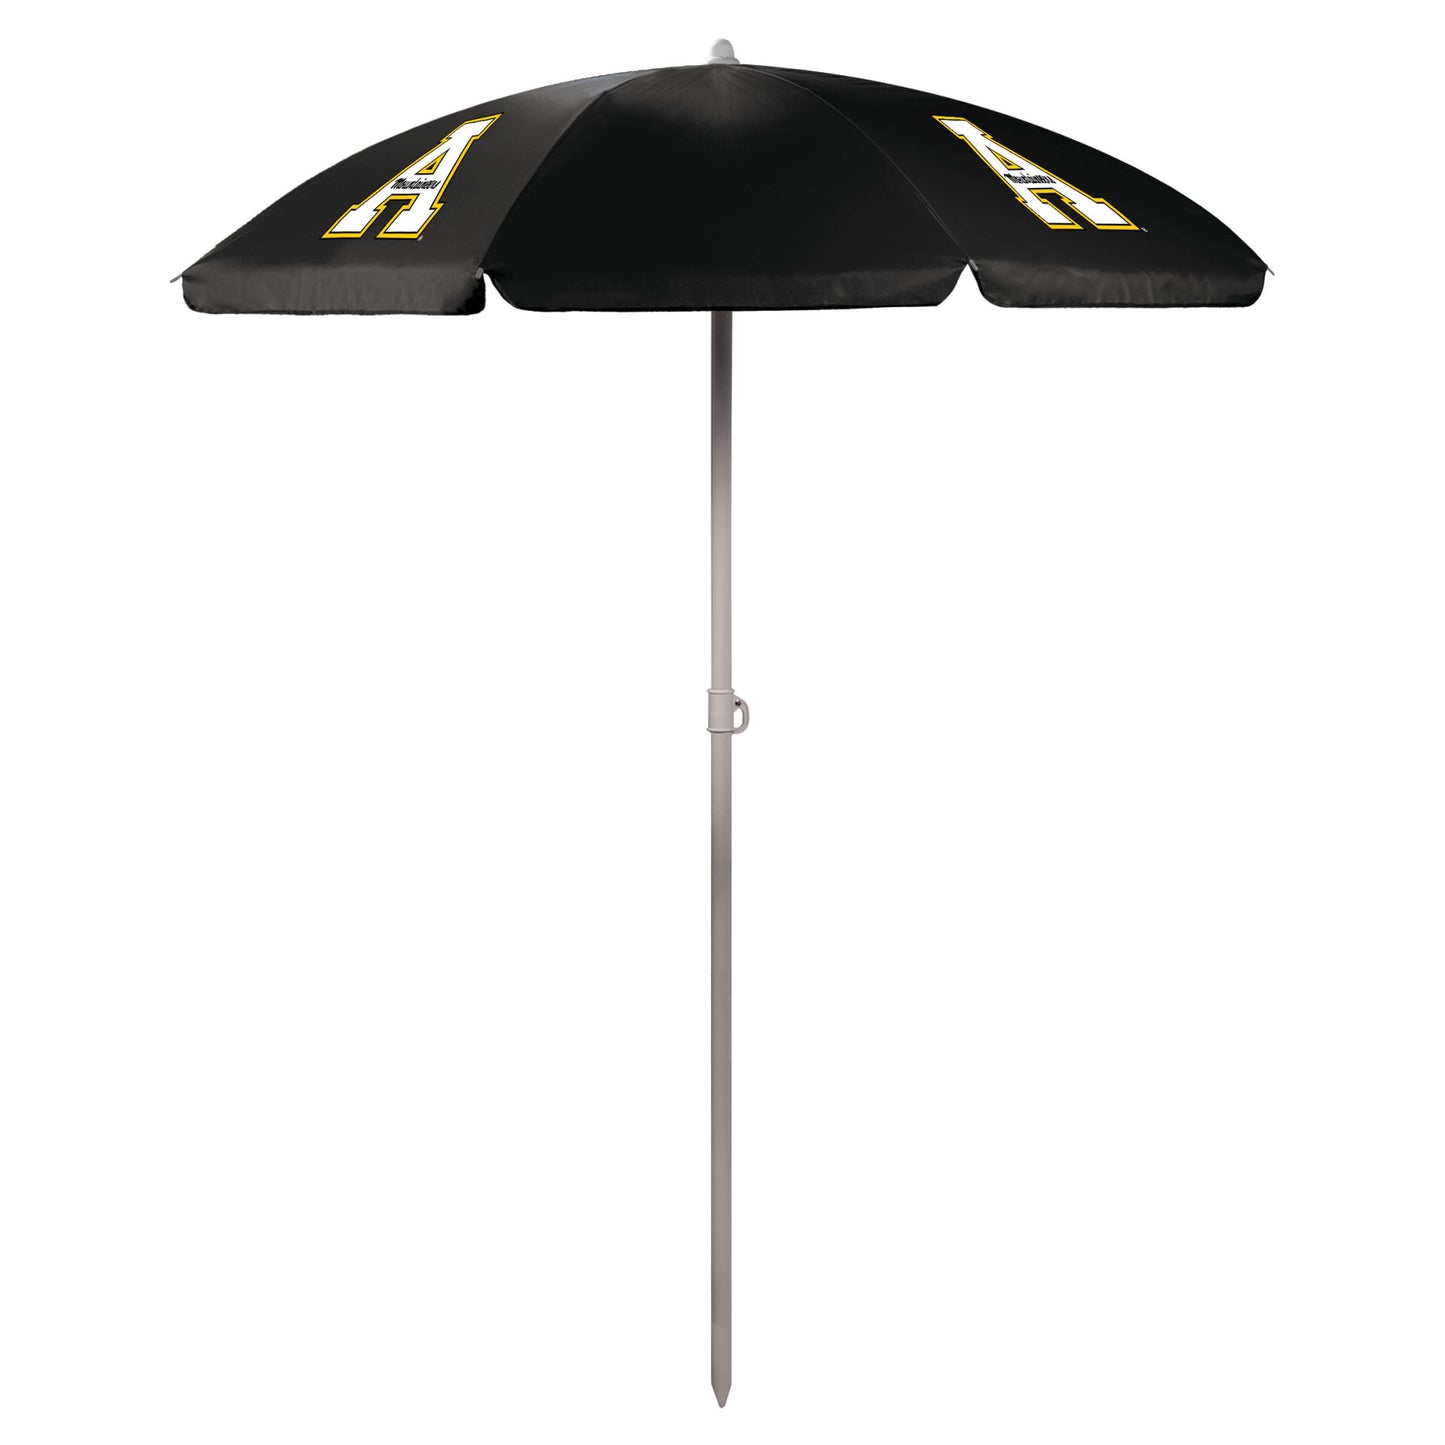 Appalachian State Mountaineers 5.5' Portable Beach Umbrella by Picnic Time